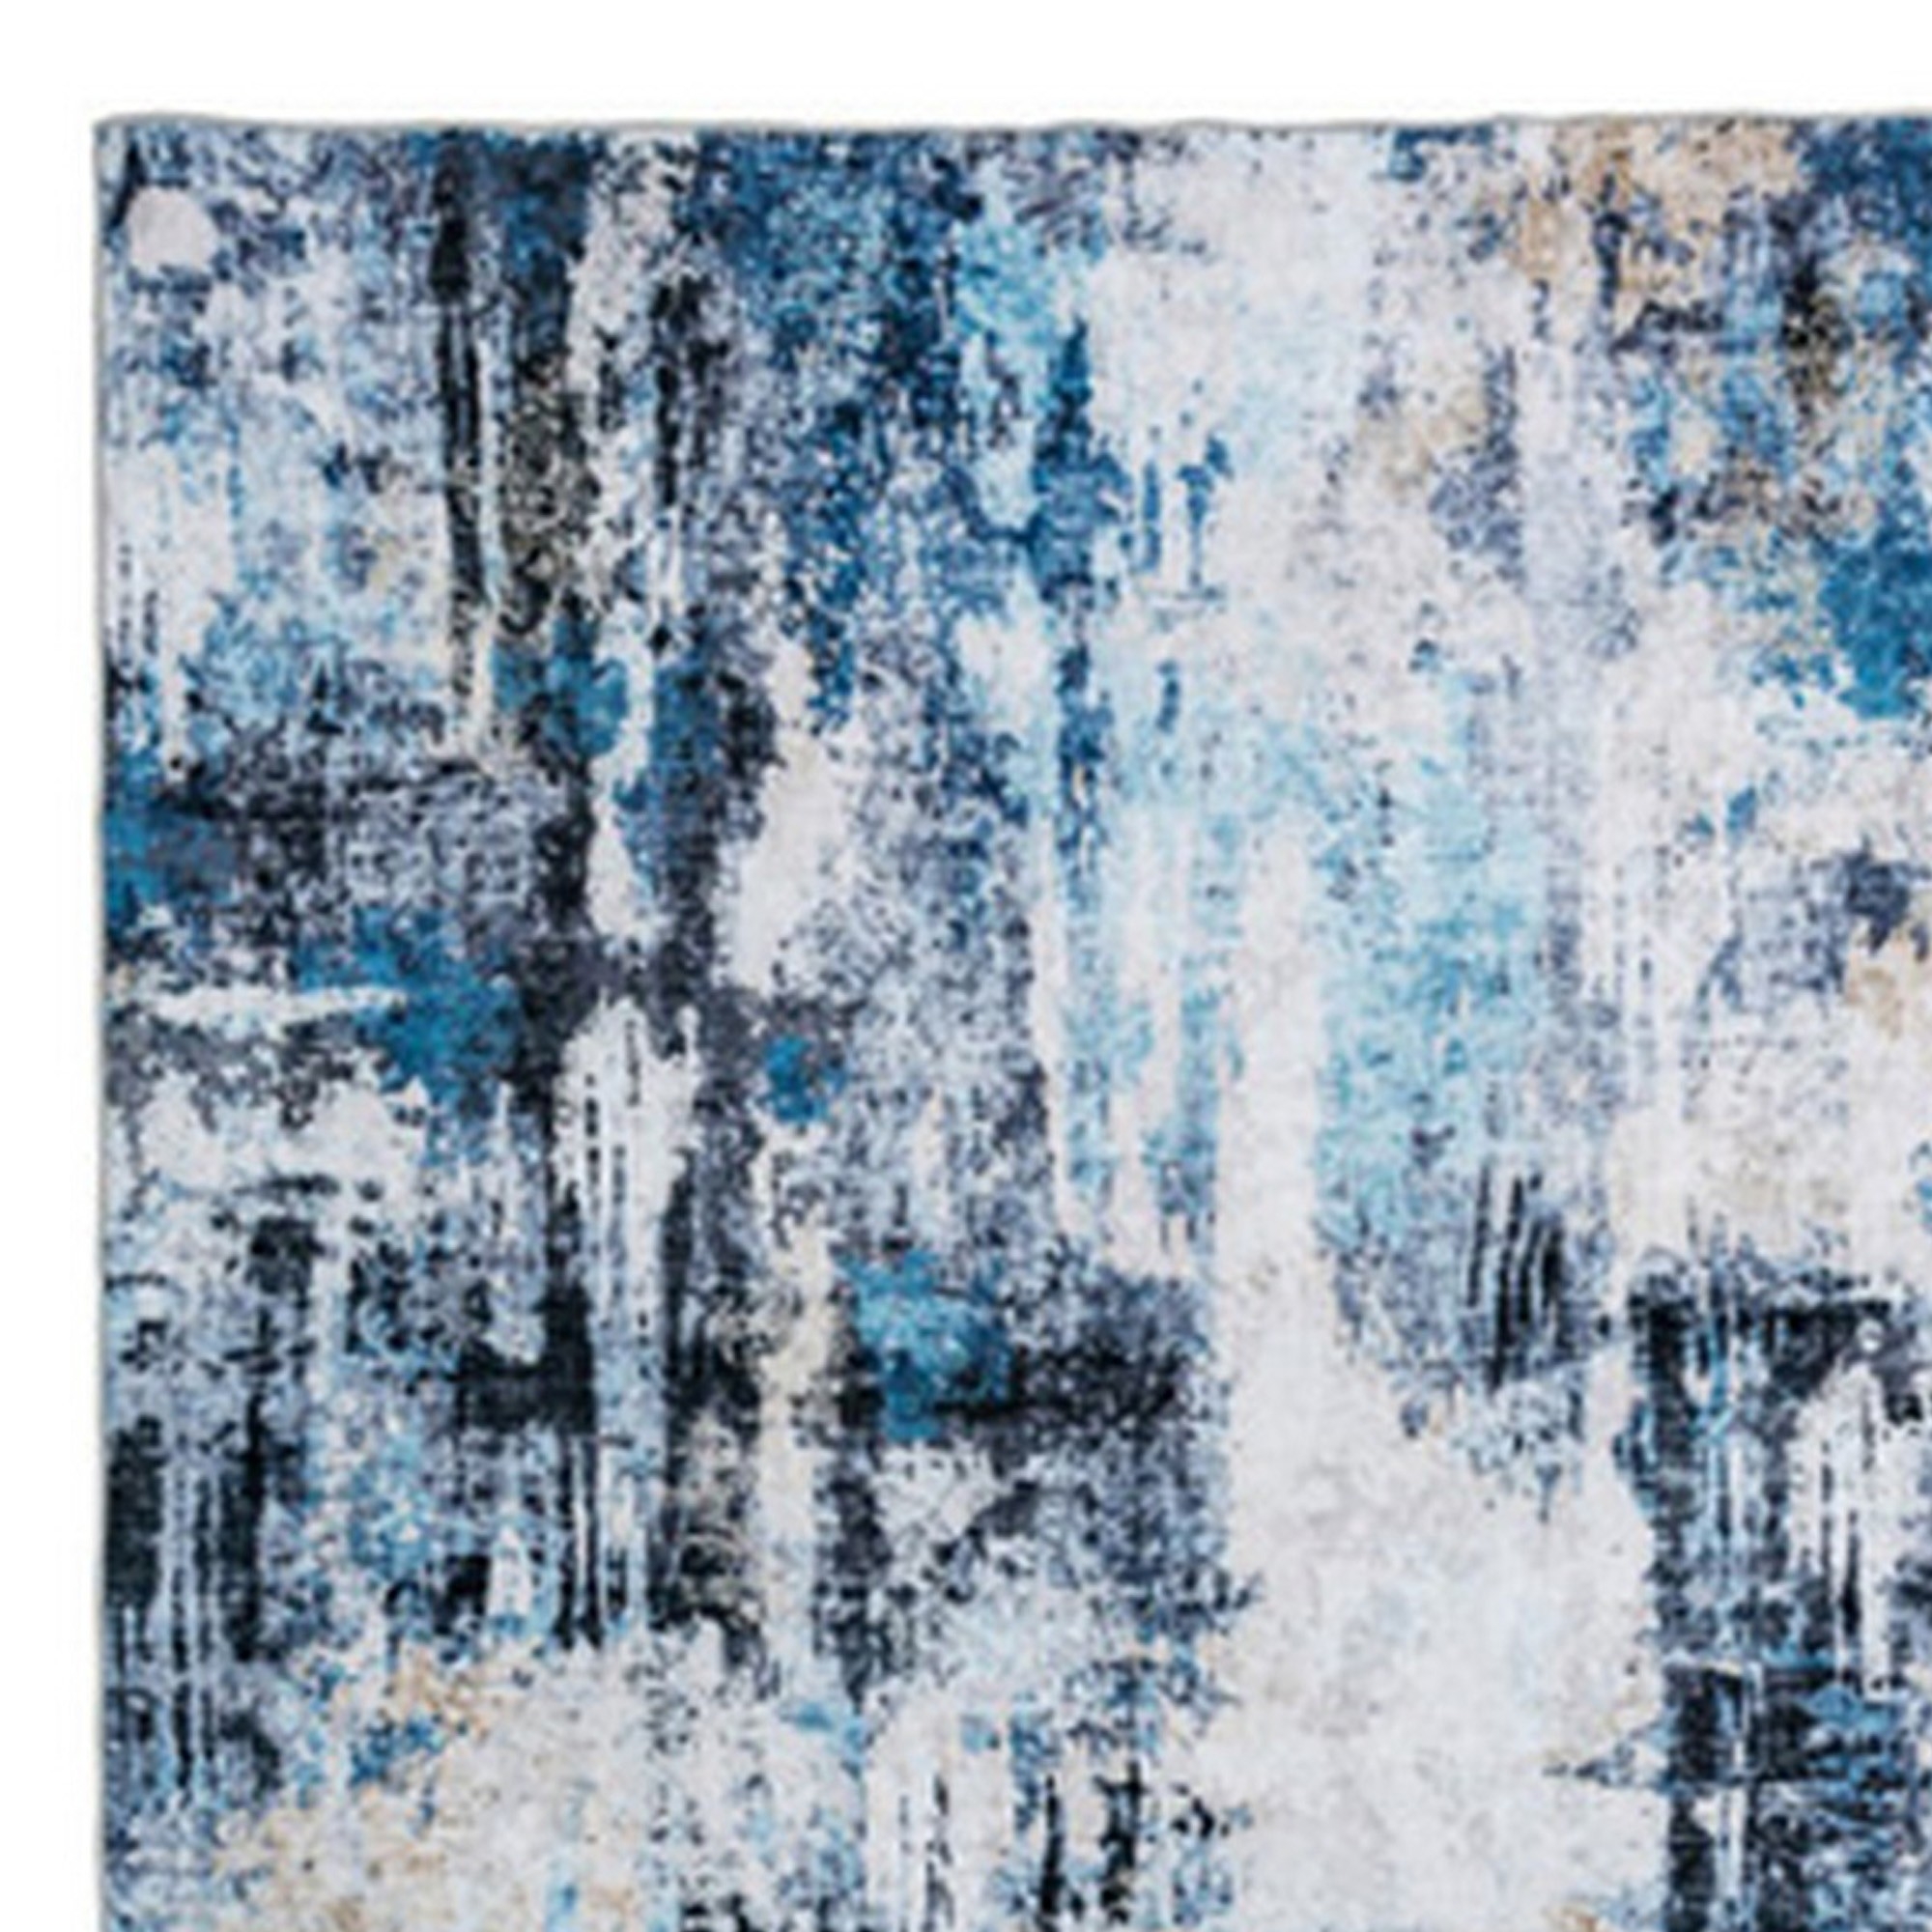 Rue 10 X 8 Large Soft Fabric Floor Area Rug, Washable, Abstract Blue And White Design- Saltoro Sherpi